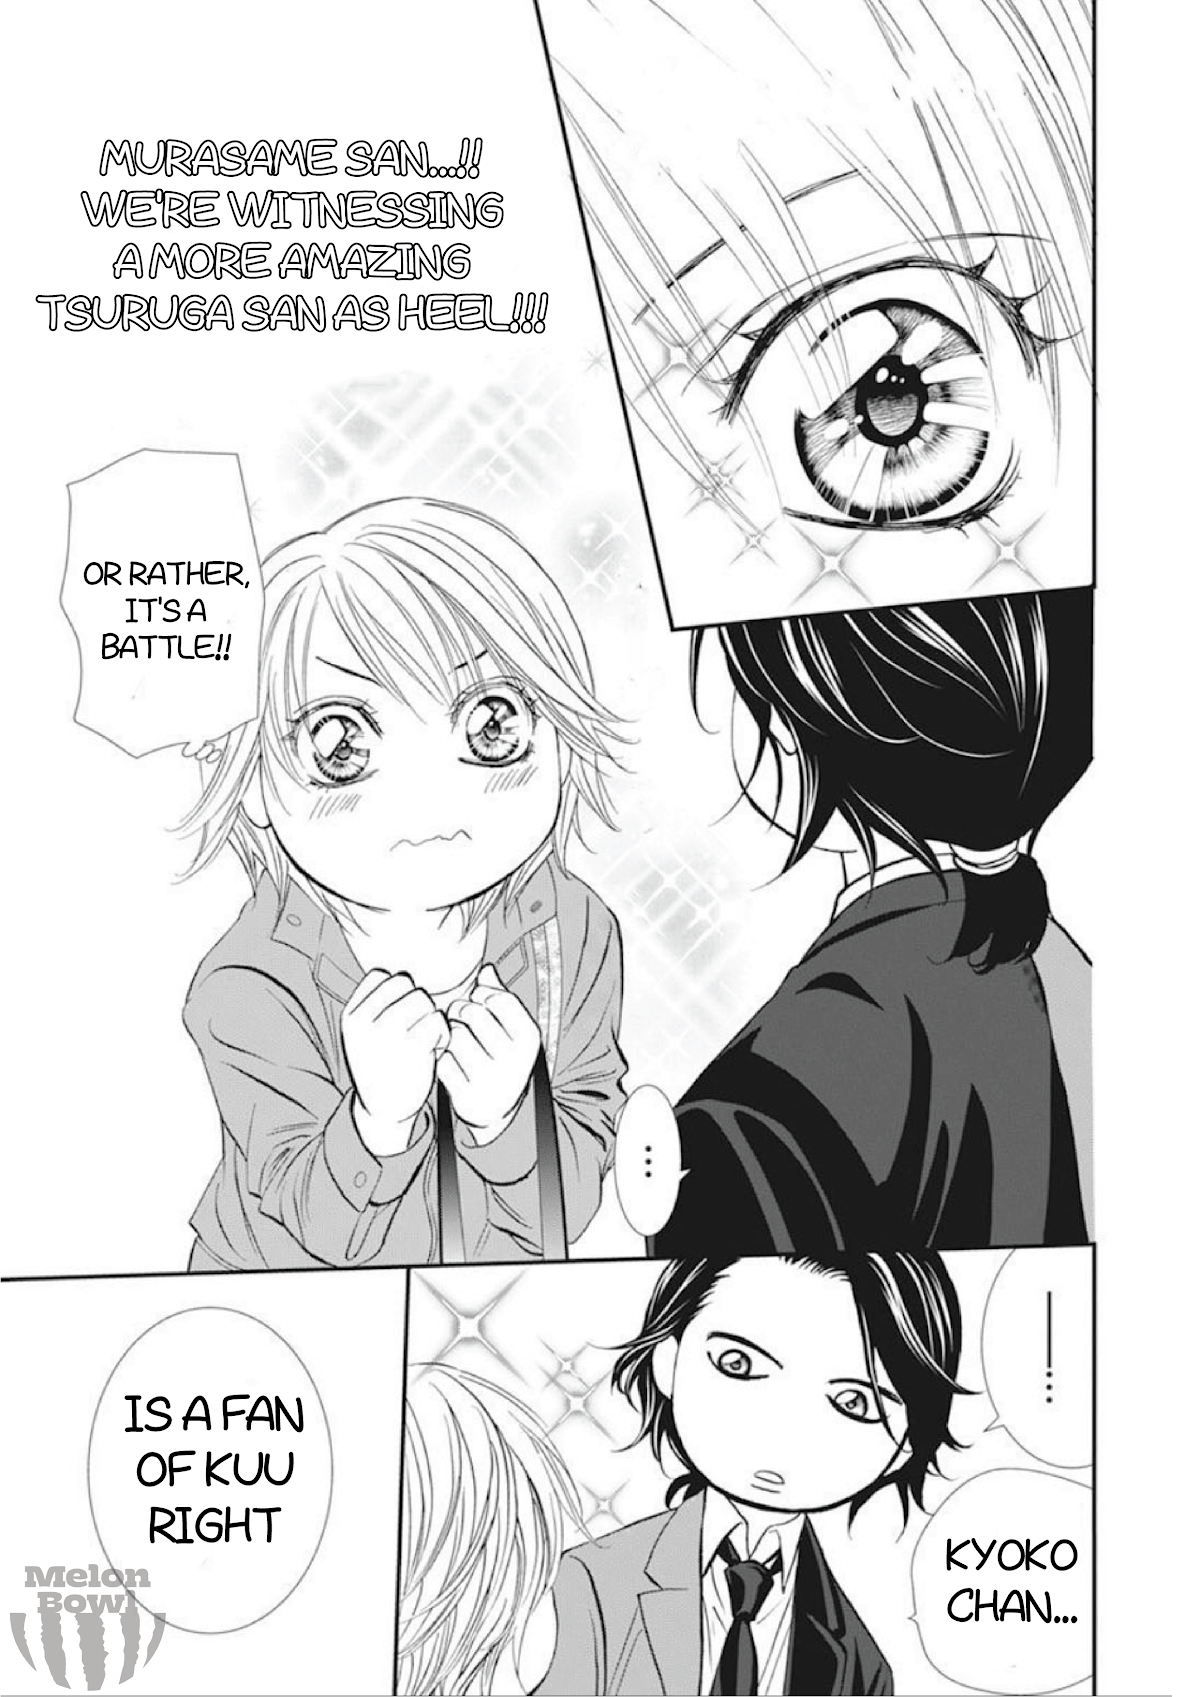 Skip Beat!, Chapter 306 Fairy Tale Dialogue image 08